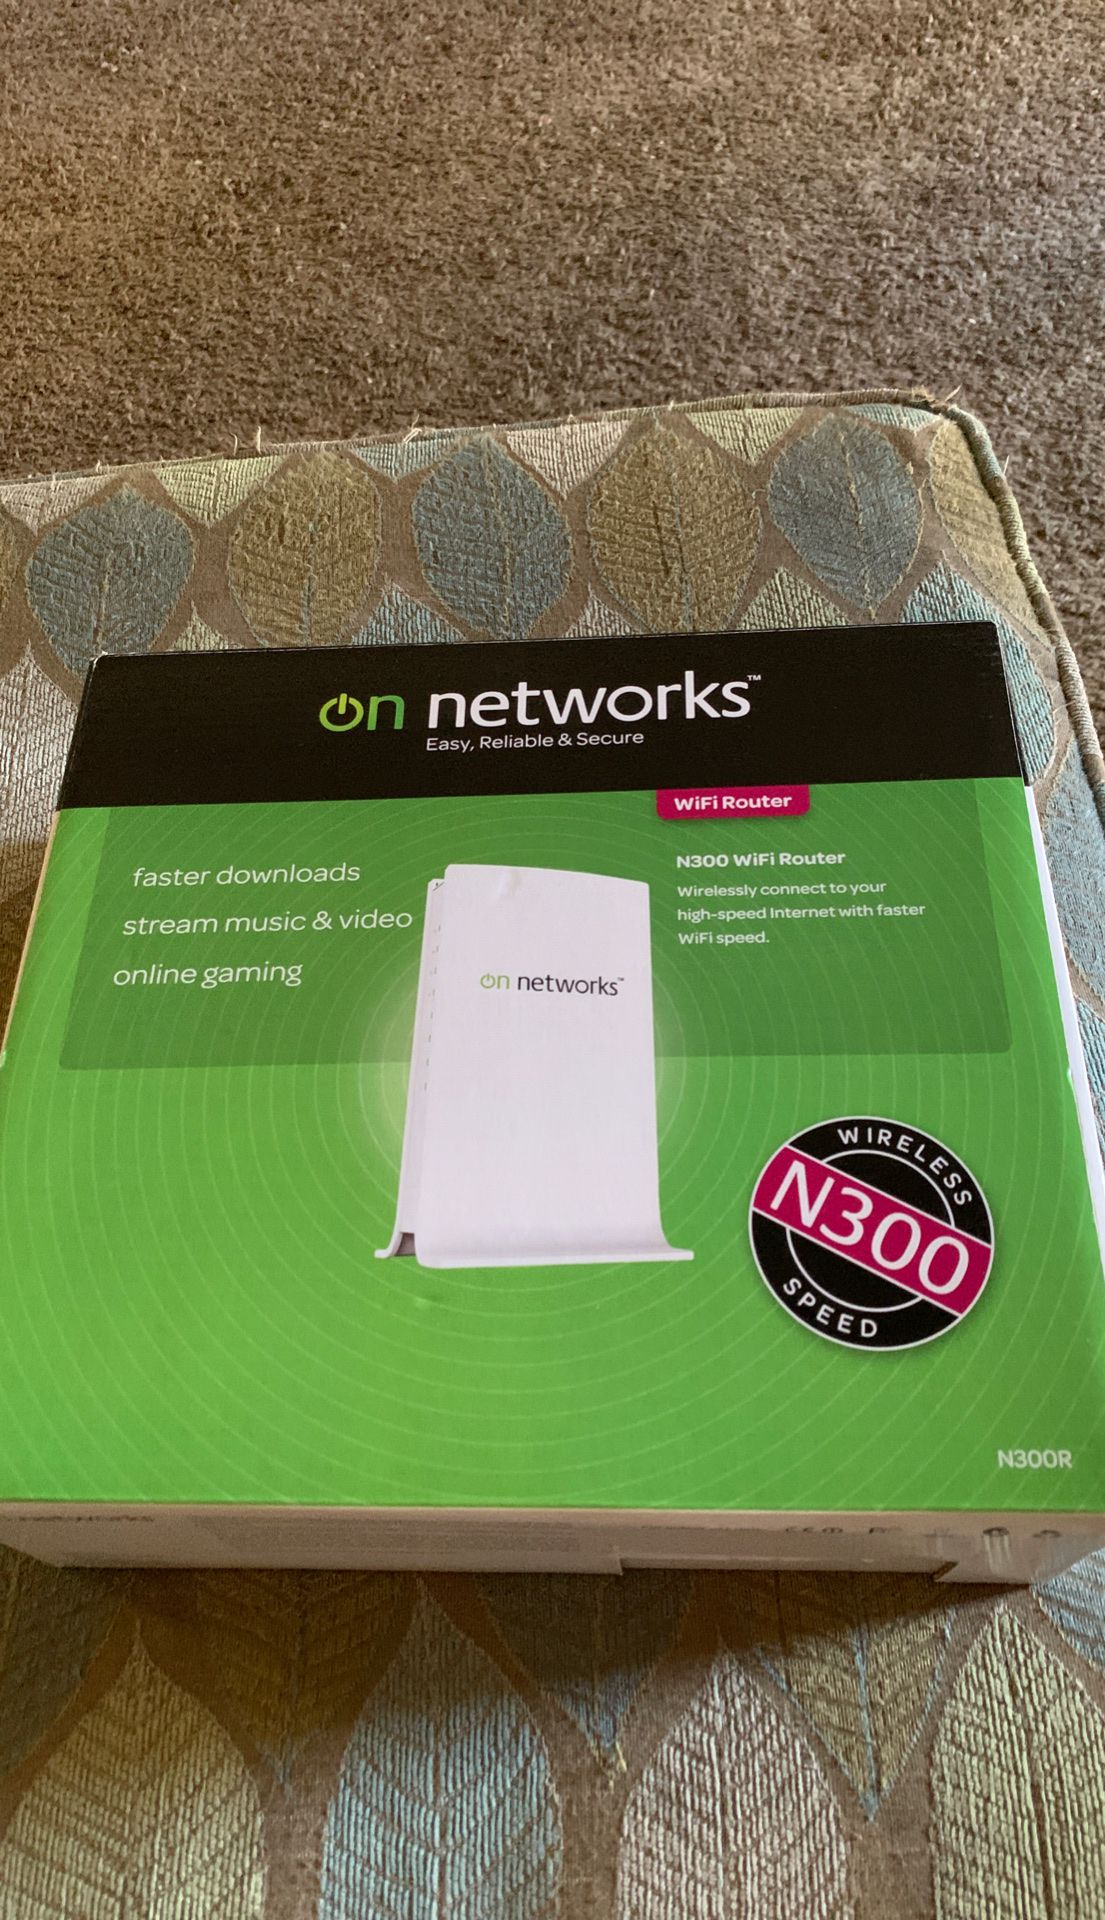 On network n300 Wifi router brand new